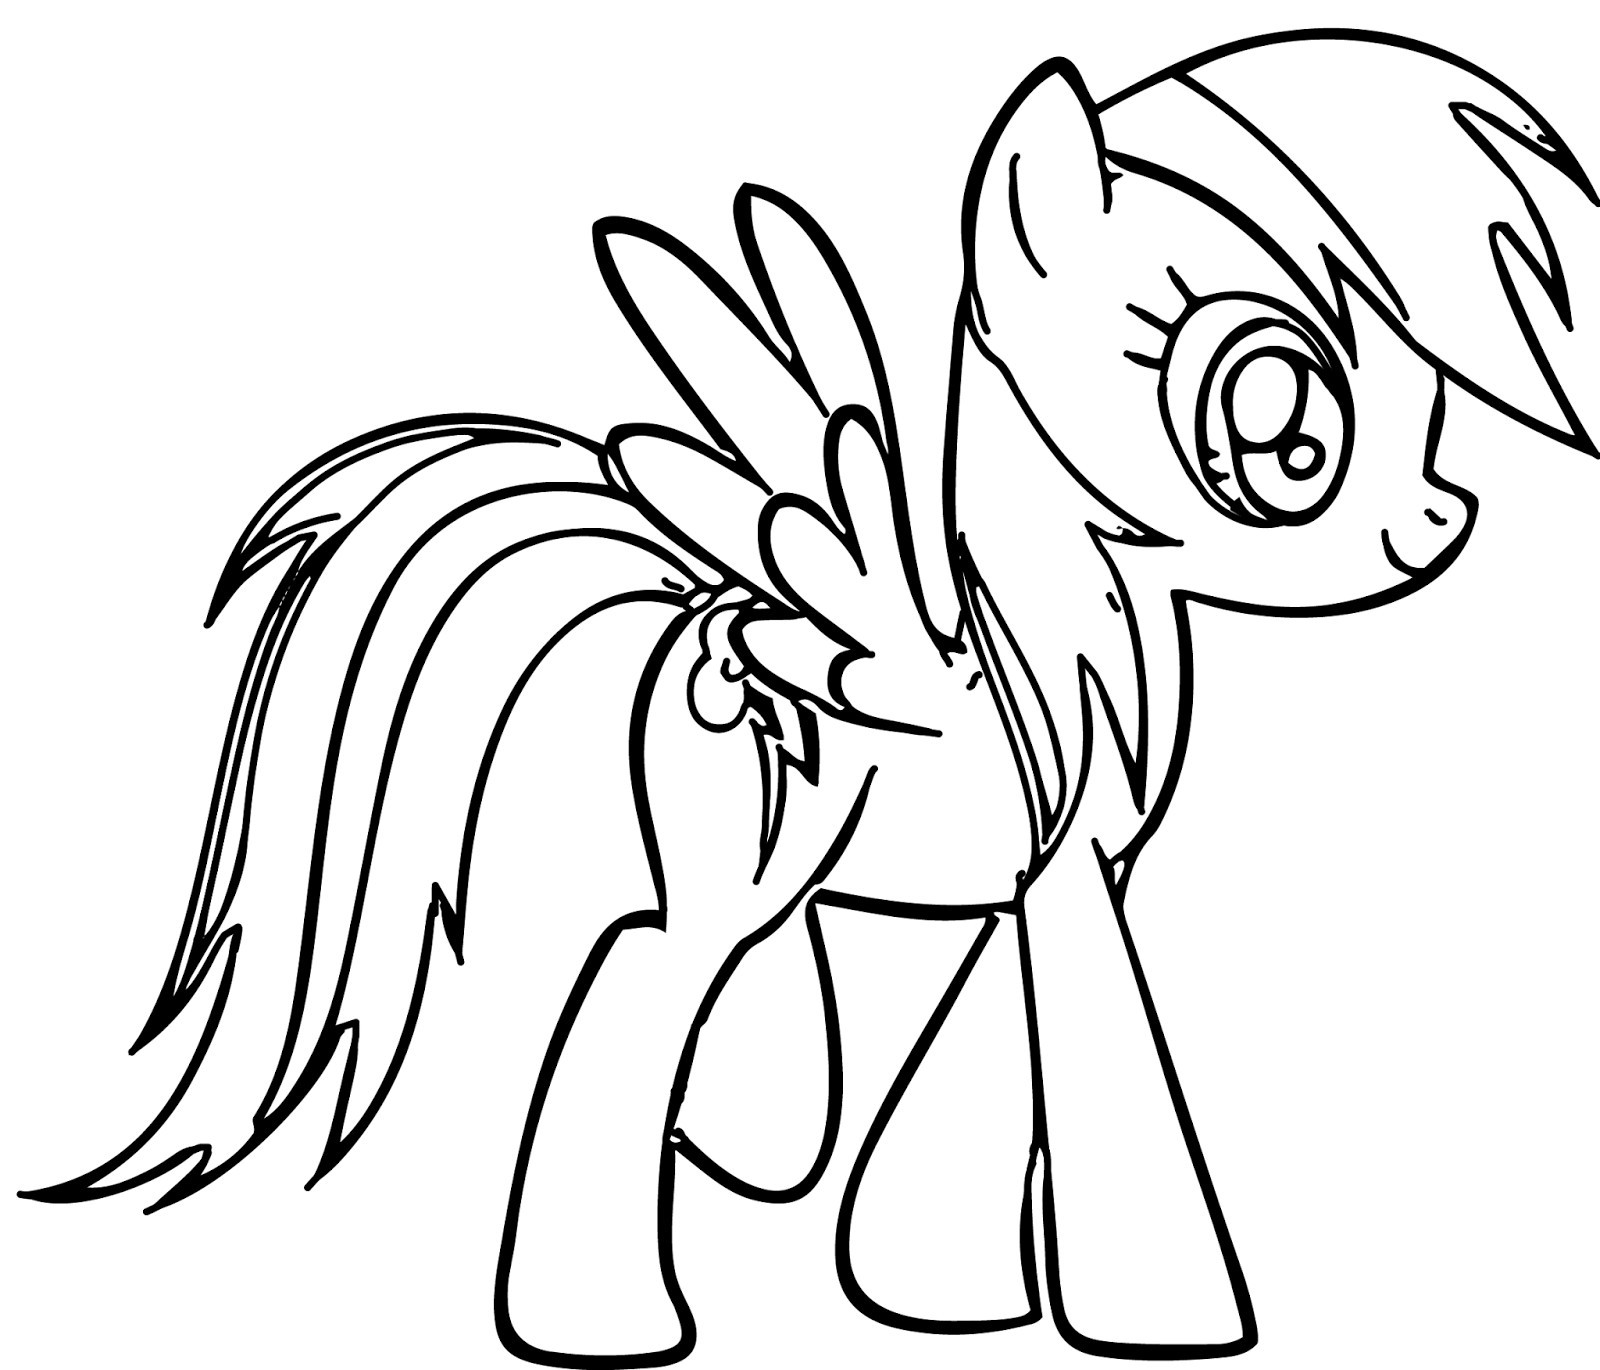 Rainbow Dash Coloring Page | Free download on ClipArtMag